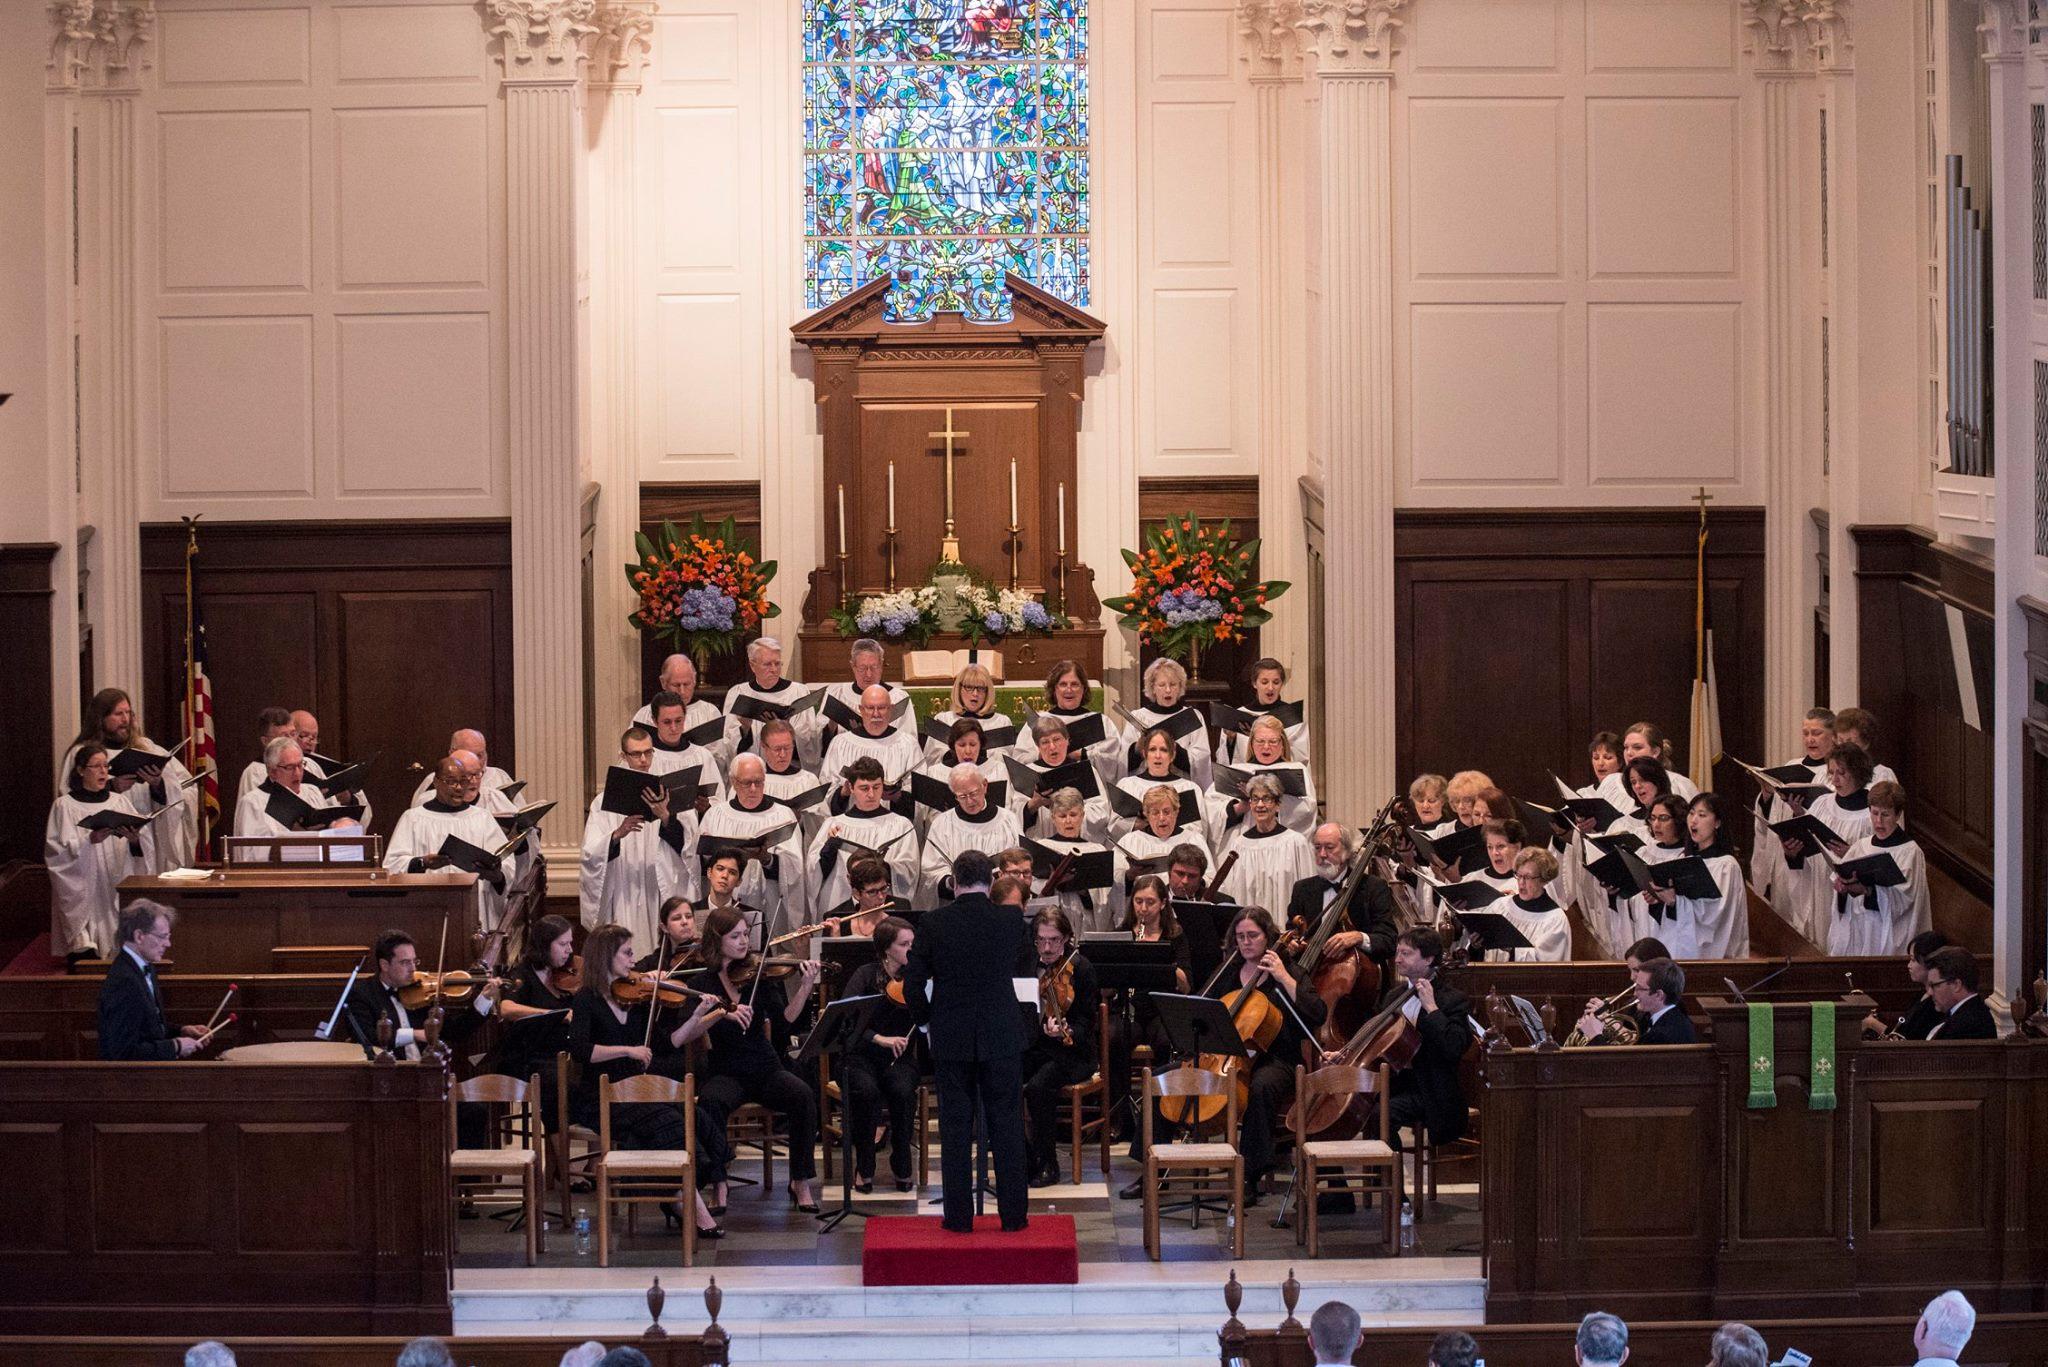 Spring Choral Concert with River Road Chancel Choir with Orchestra